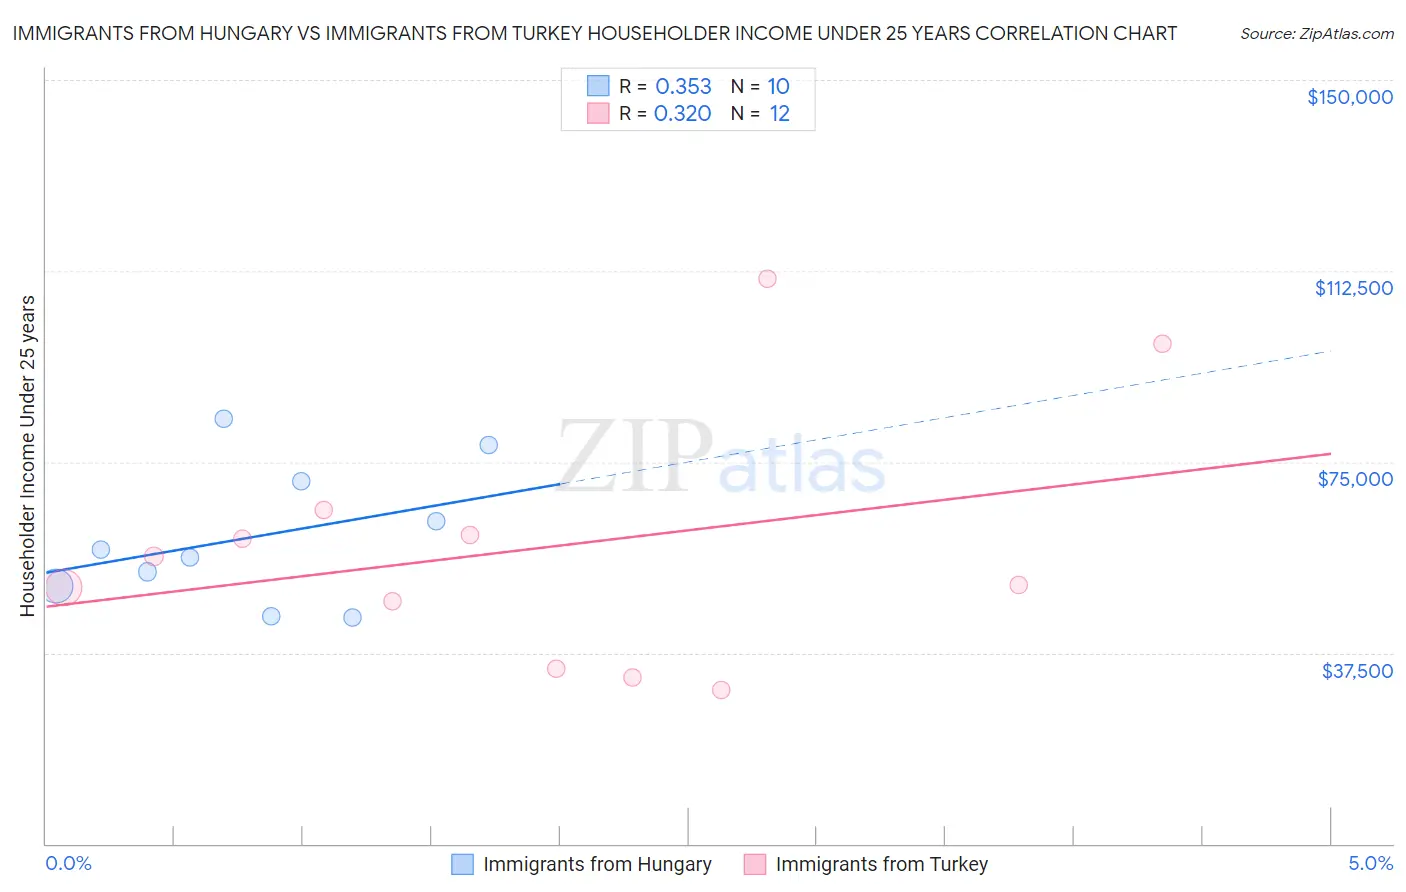 Immigrants from Hungary vs Immigrants from Turkey Householder Income Under 25 years